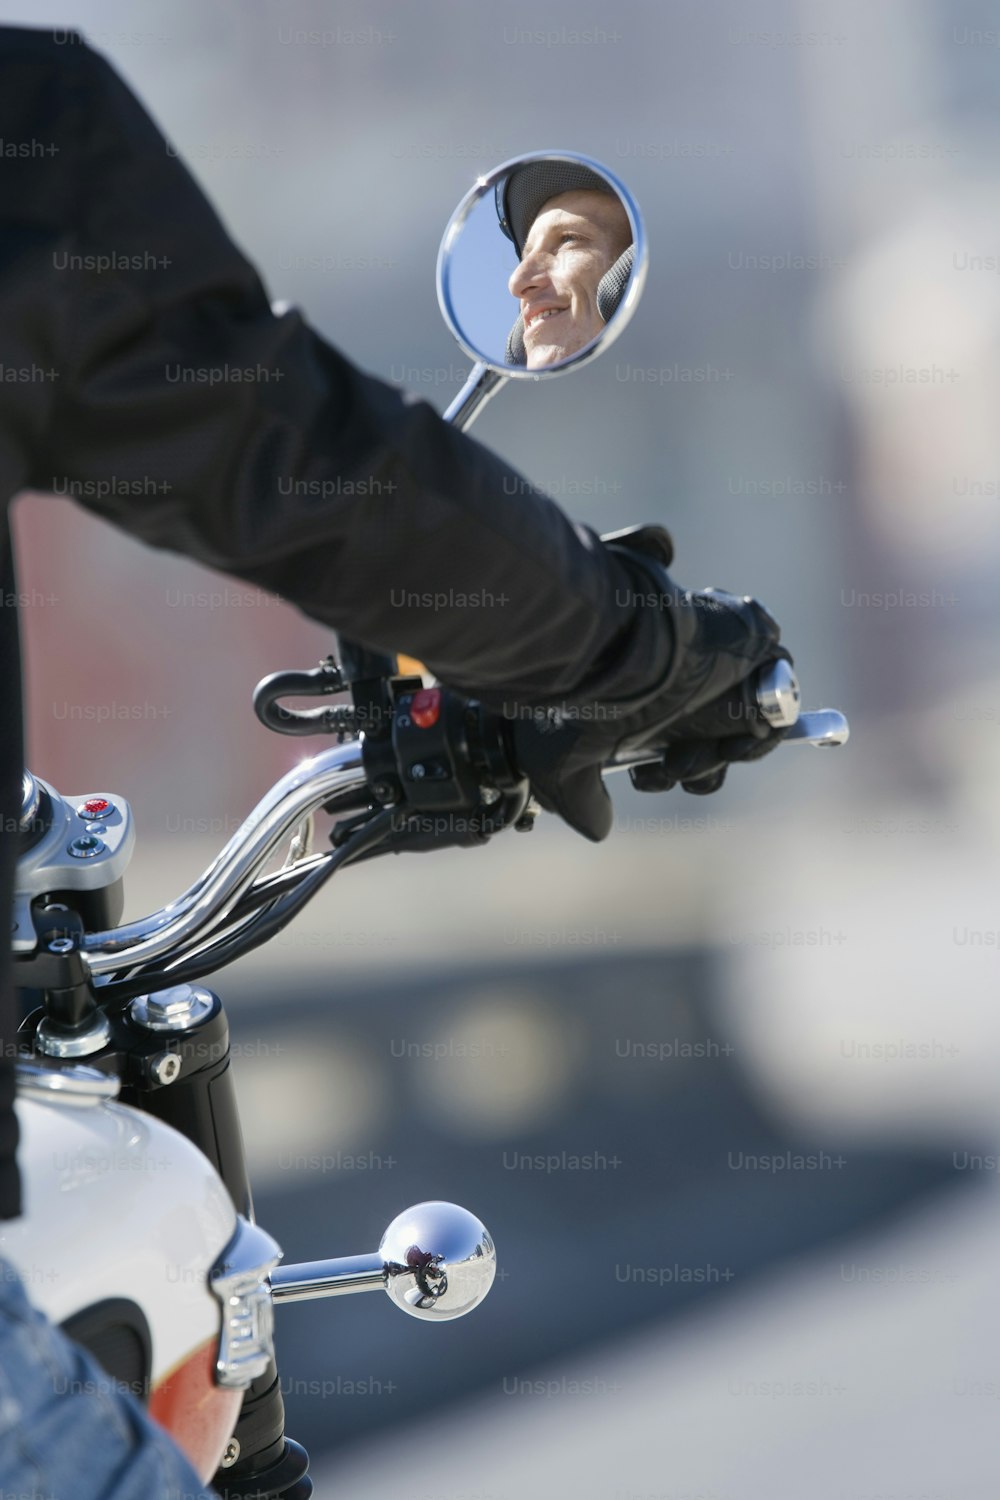 a close up of a person riding a motorcycle